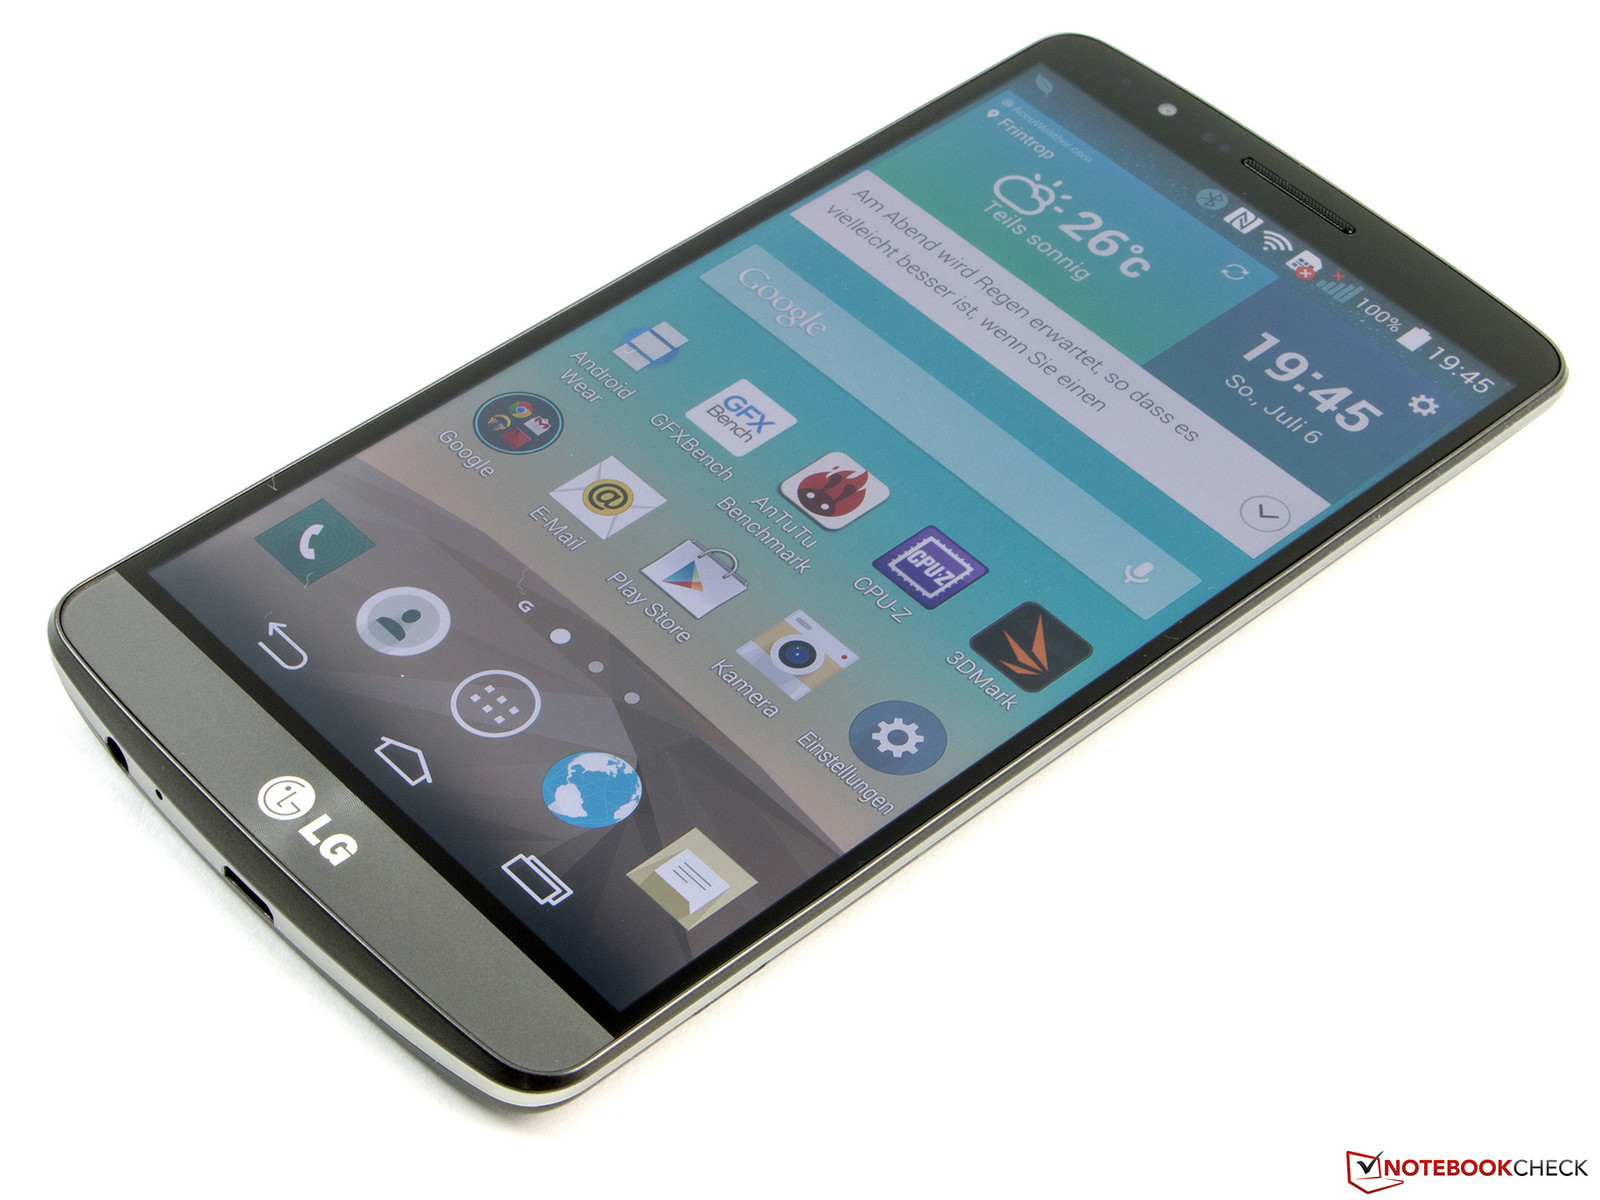 LG G3 price revealed in Singapore and Australia - CNET